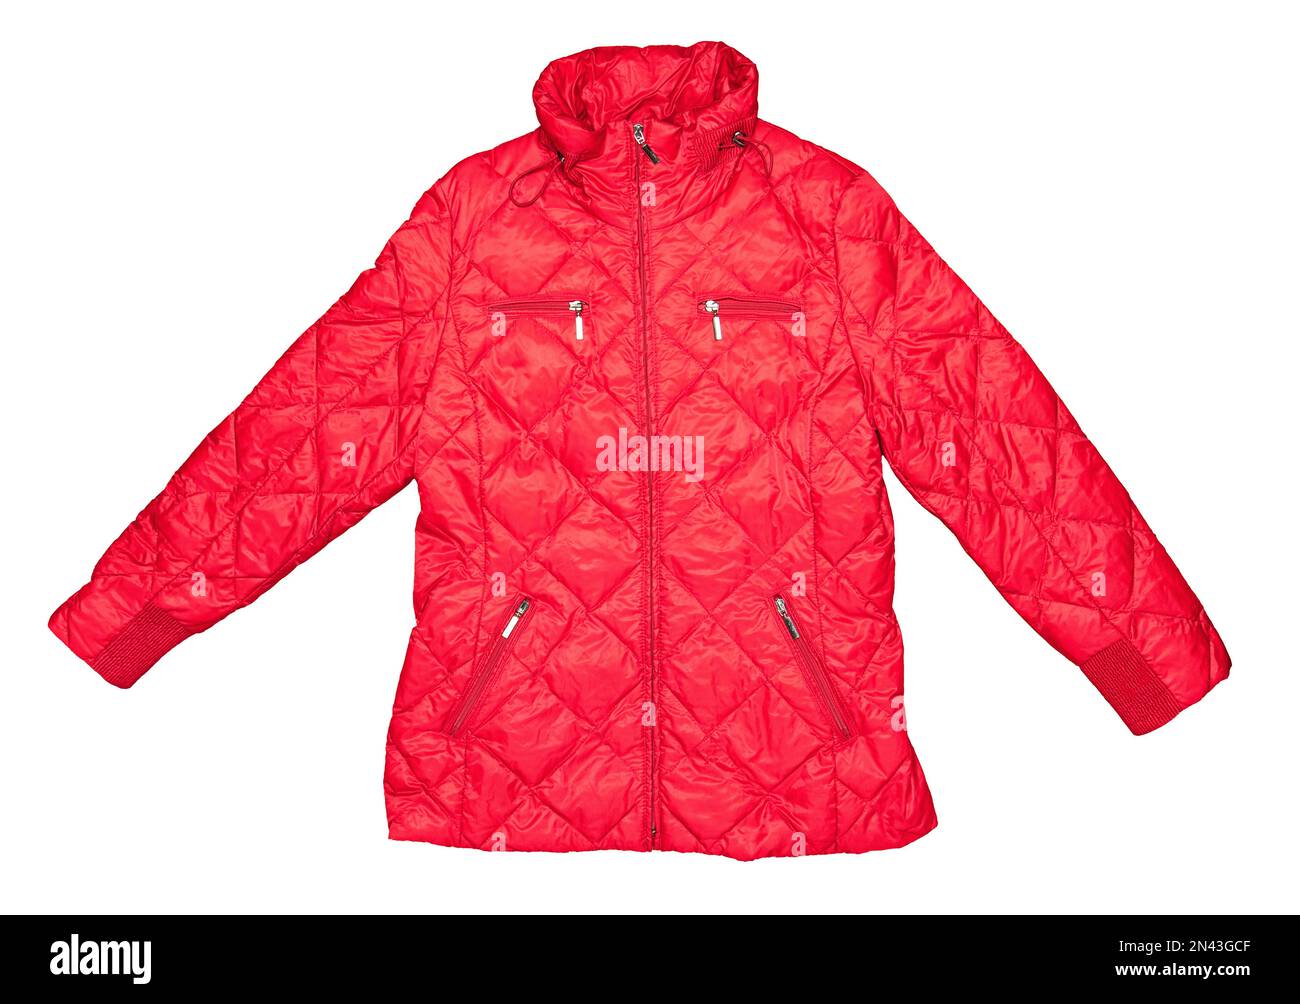 Brightly red down women's jacket for skiing, isolated on a white background. Stock Photo